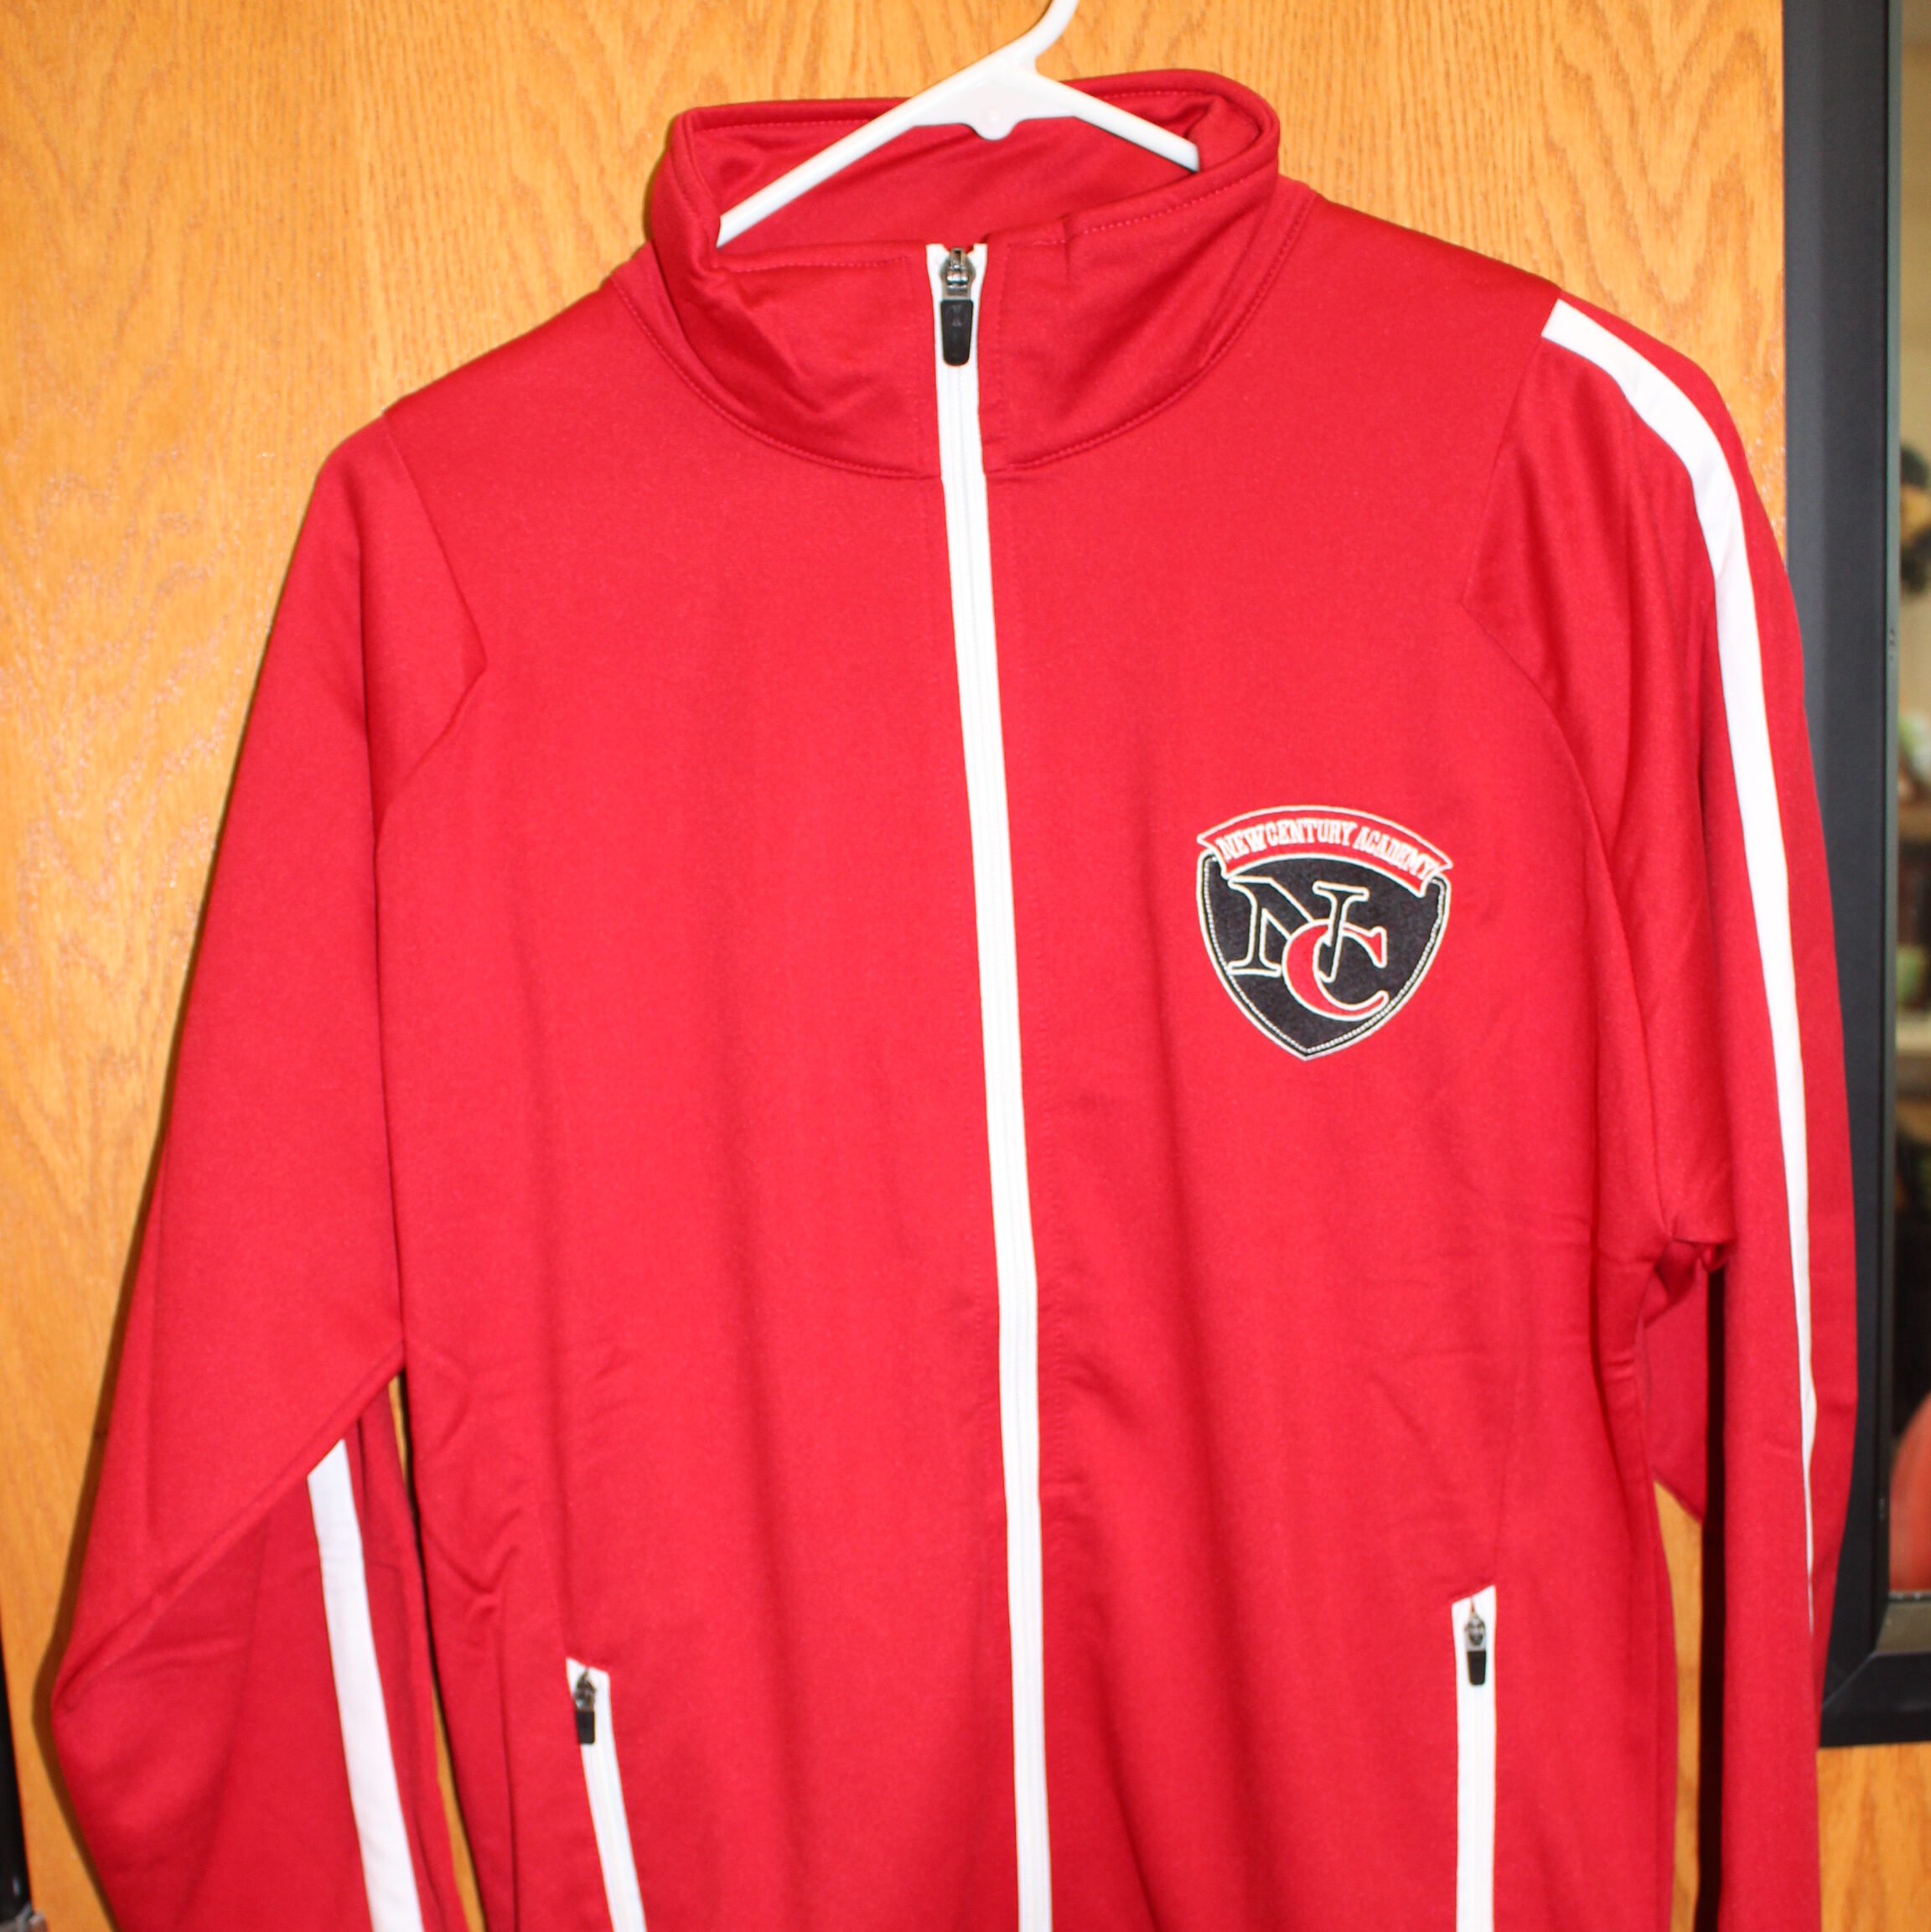 Red warm up jacket with the New Century Academy logo on it